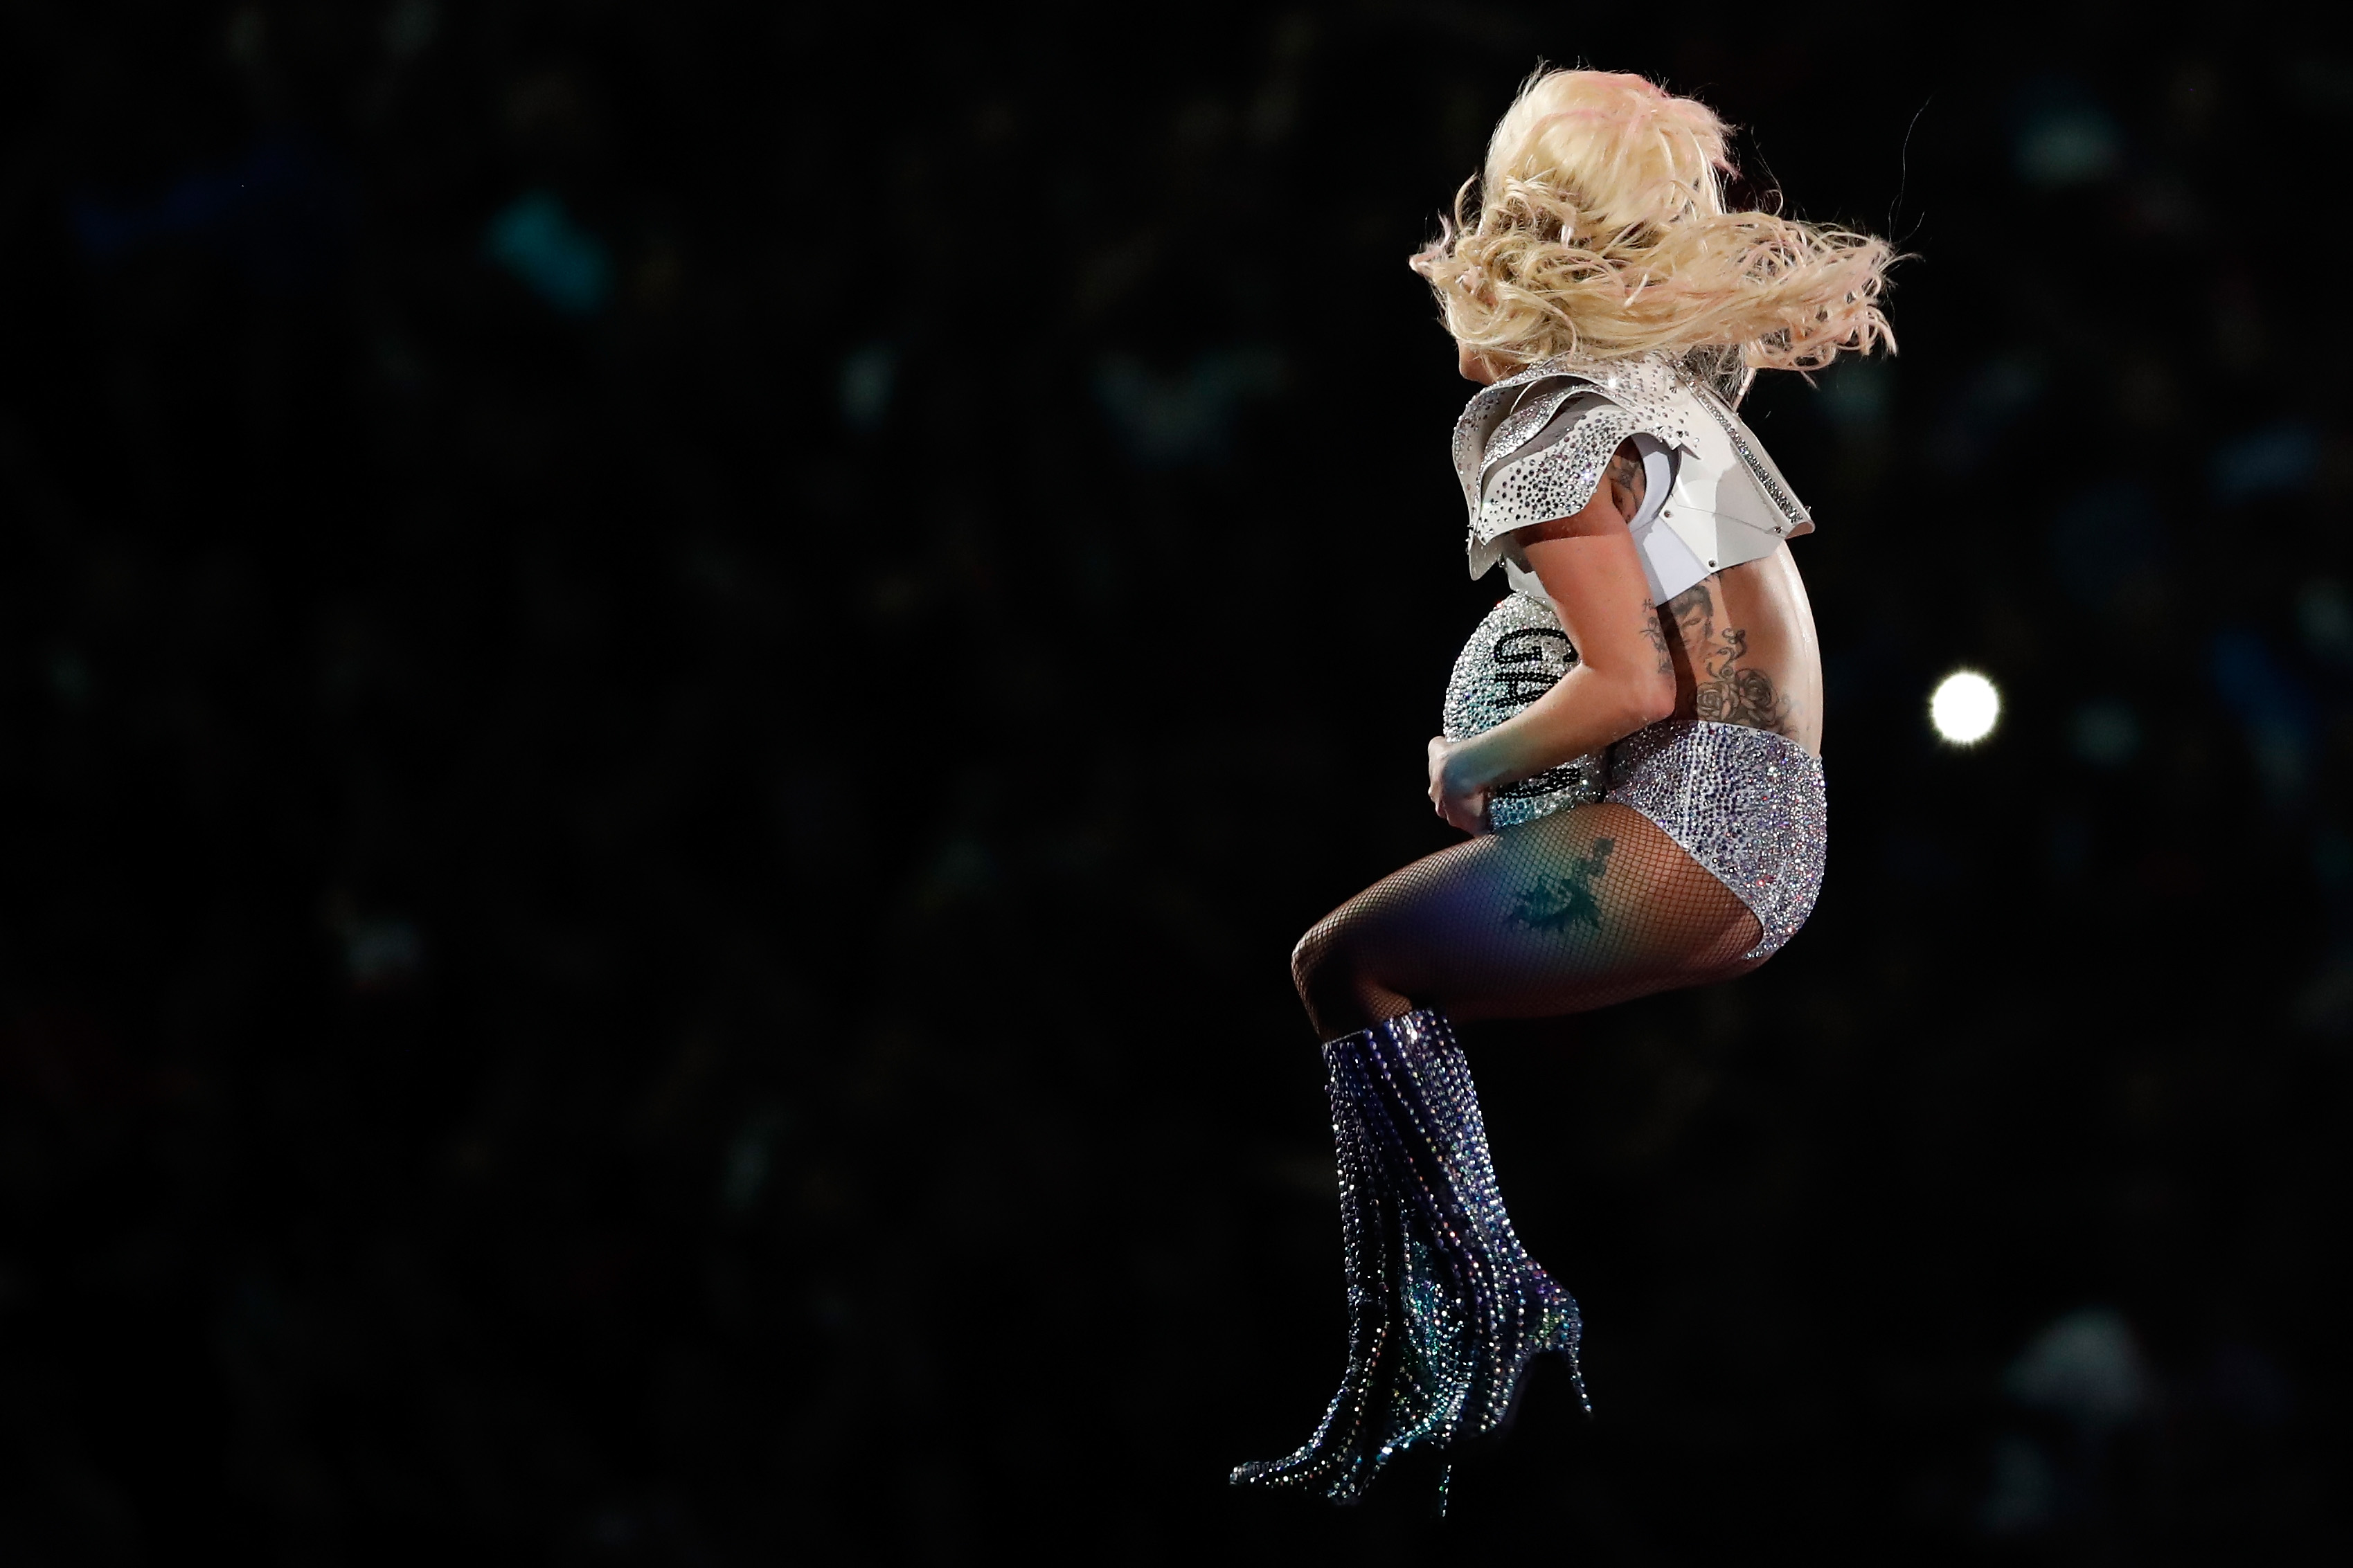 HOUSTON, TX - FEBRUARY 05: Lady Gaga performs during the Pepsi Zero Sugar Super Bowl 51 Halftime Show at NRG Stadium on February 5, 2017 in Houston, Texas. (Photo by Gregory Shamus/Getty Images)